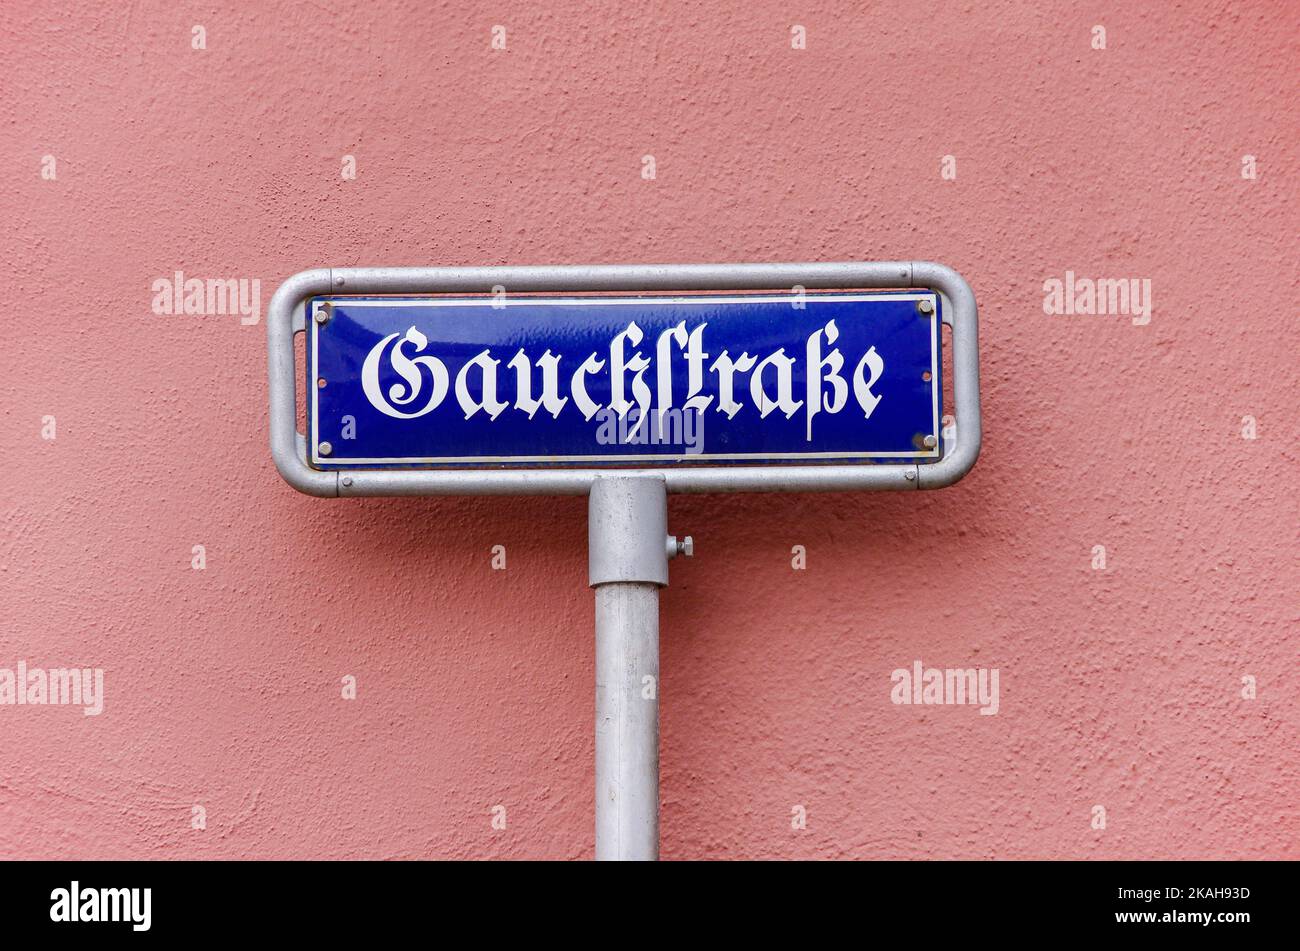 Street sign Gauchstrasse, a street sign which reads like Gauckstrasse as if it was named after the 11th Federal President of Germany. Stock Photo